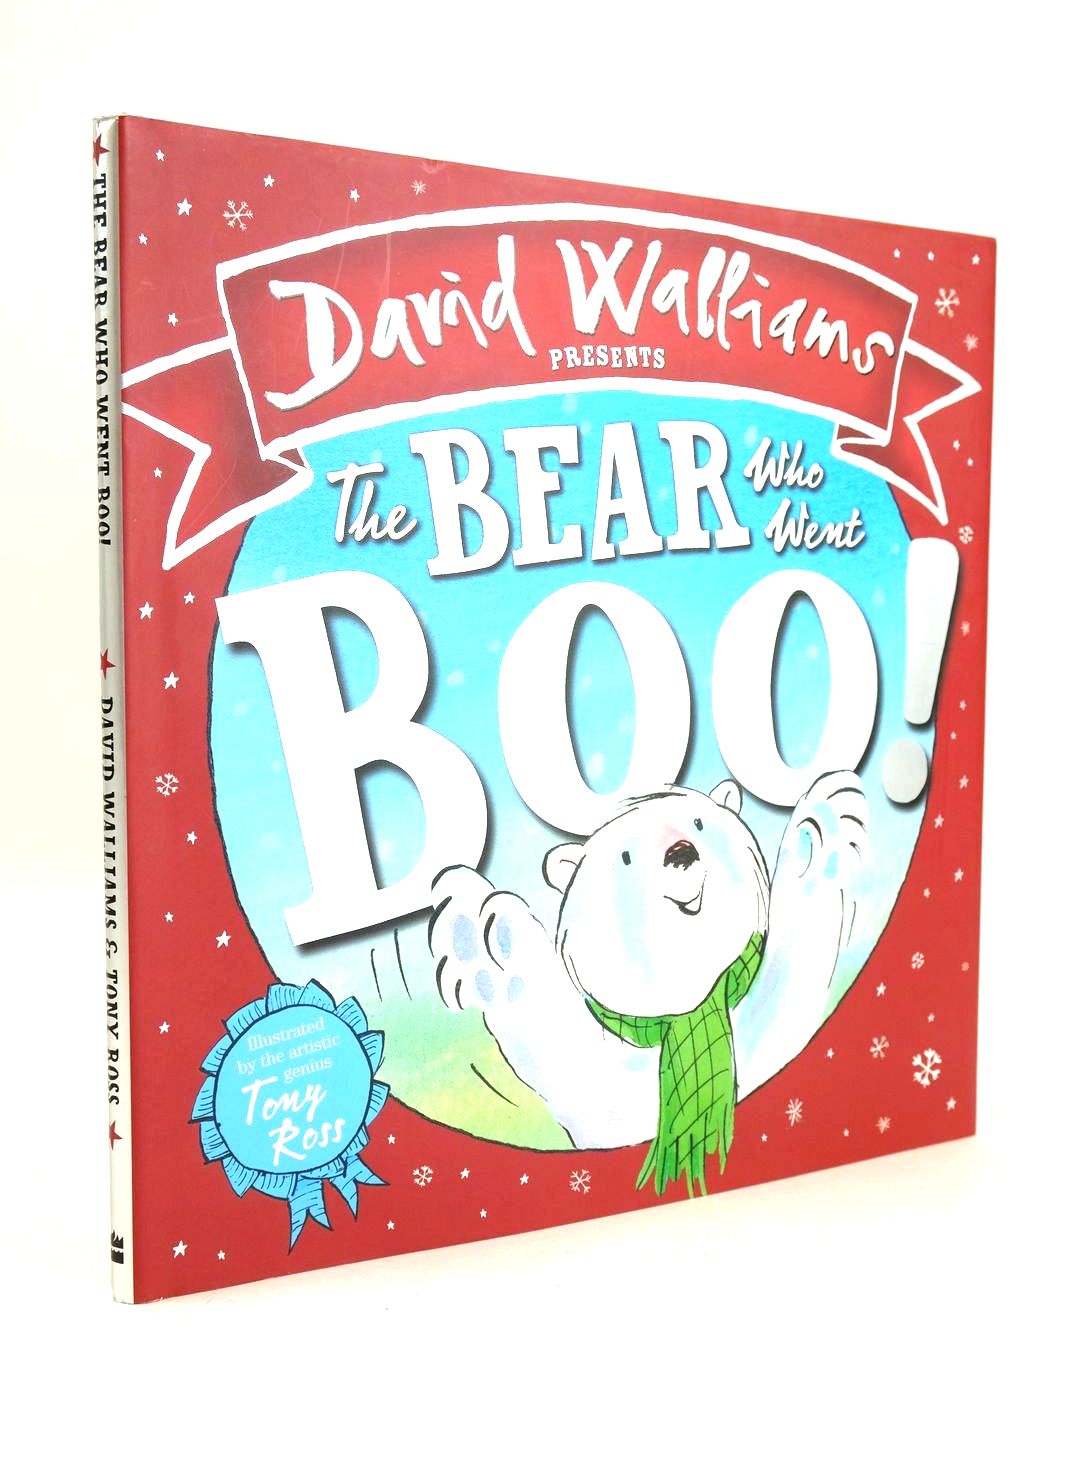 Photo of THE BEAR WHO WENT BOO! written by Walliams, David illustrated by Ross, Tony published by Harper Collins Childrens Books (STOCK CODE: 1325401)  for sale by Stella & Rose's Books